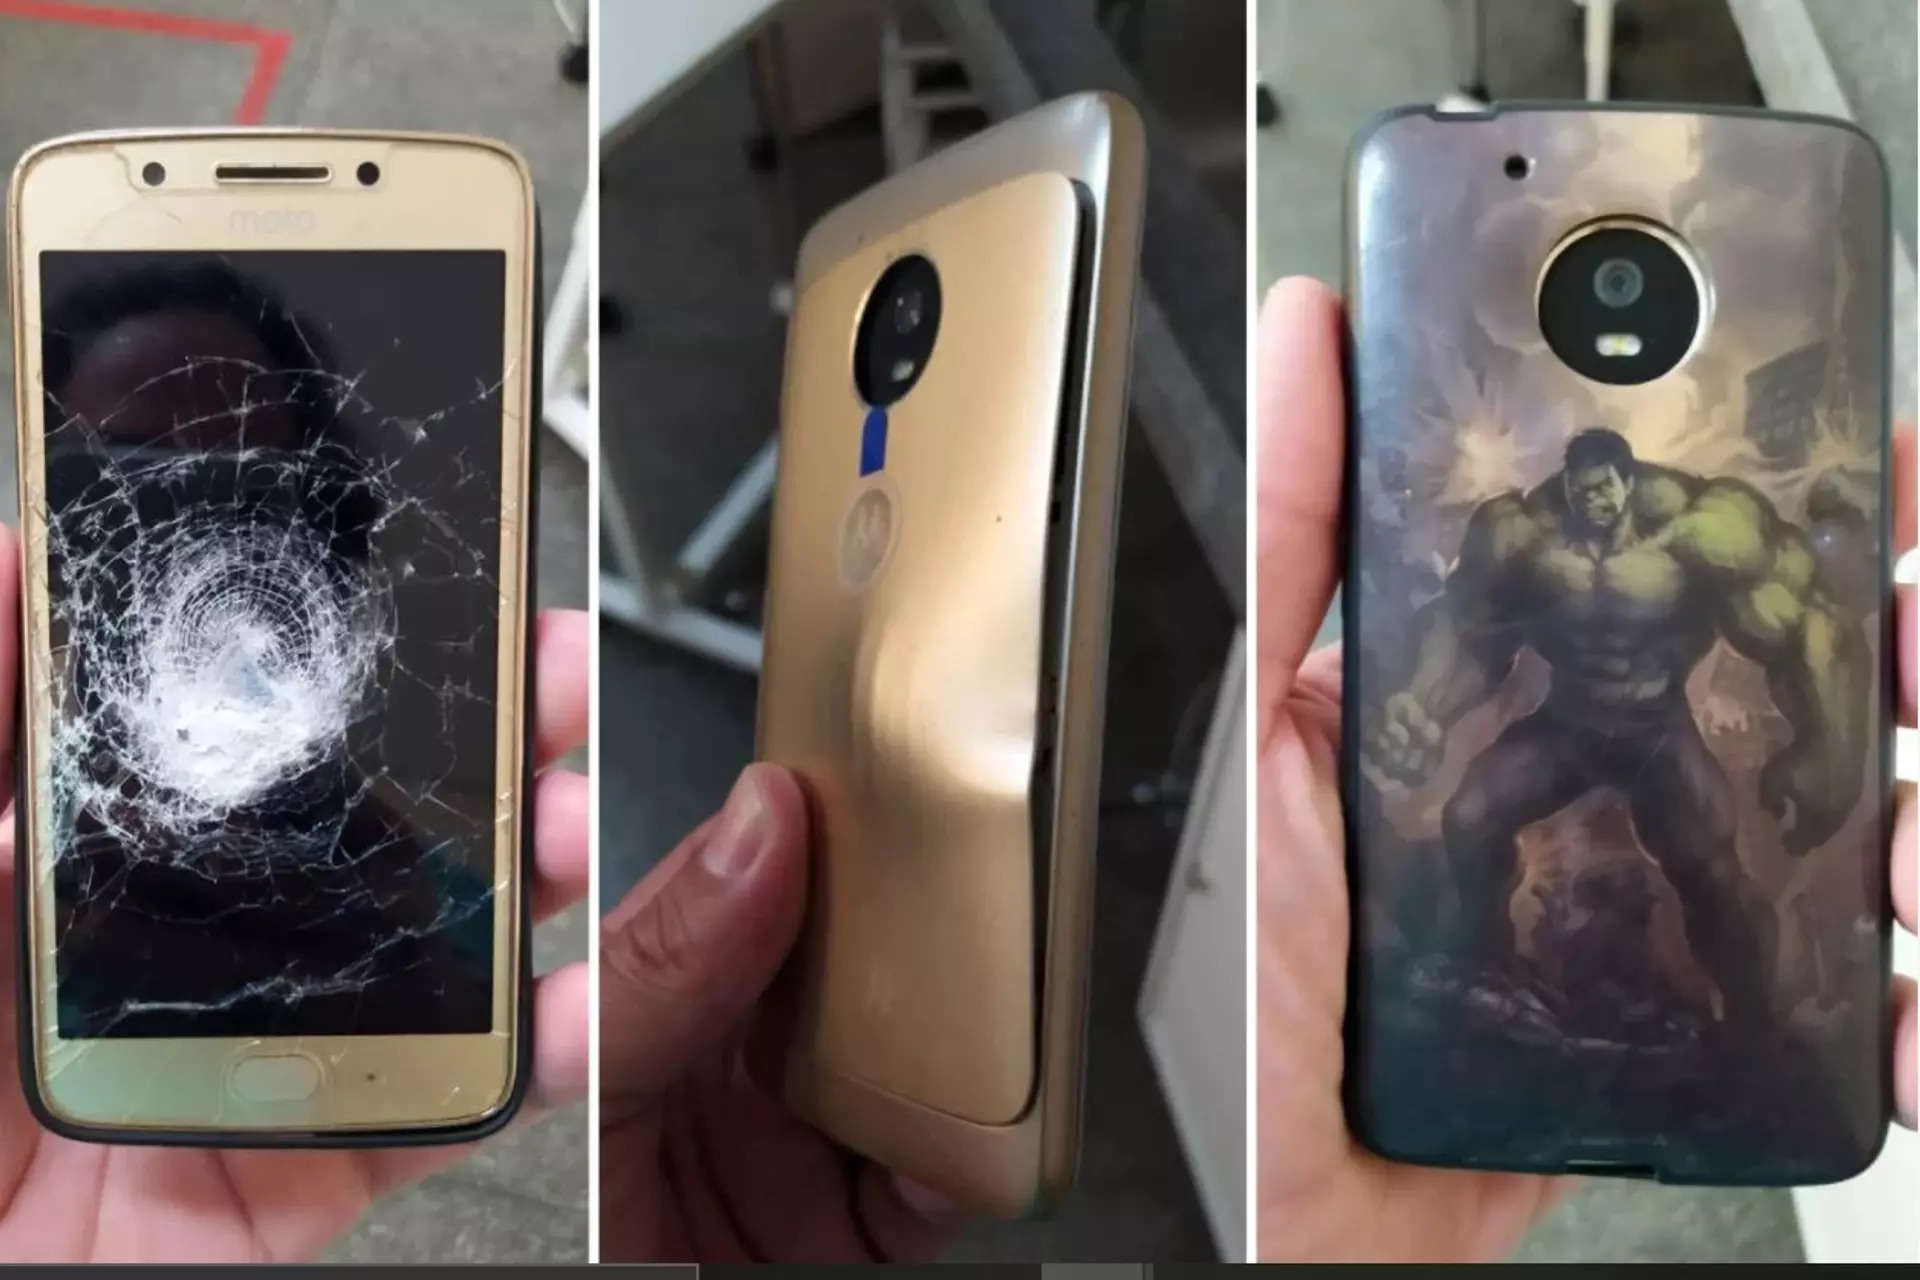 Motorola phone with Hulk phone cases saves owner's life by stopping a bullet